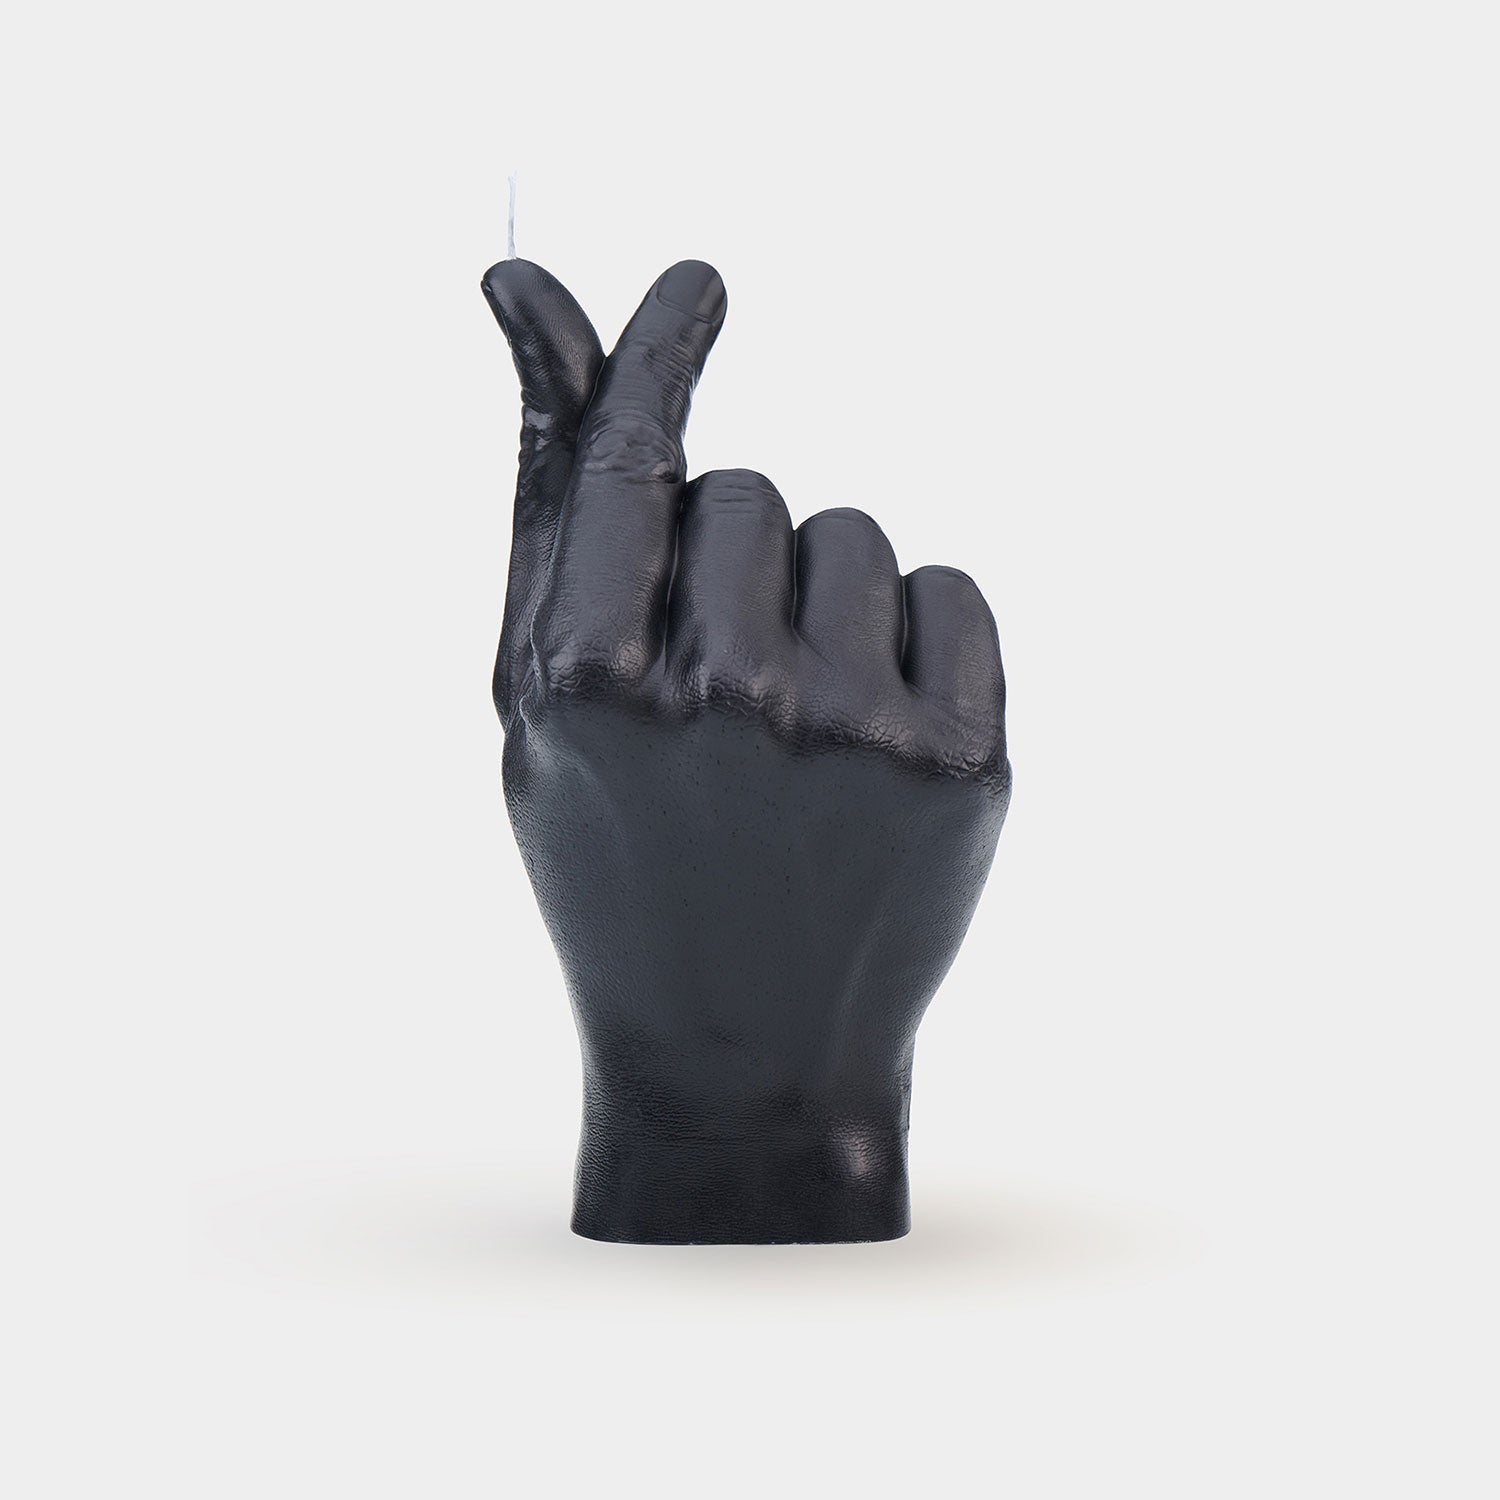 CandleHand "Finger Hearts" Candle - Black